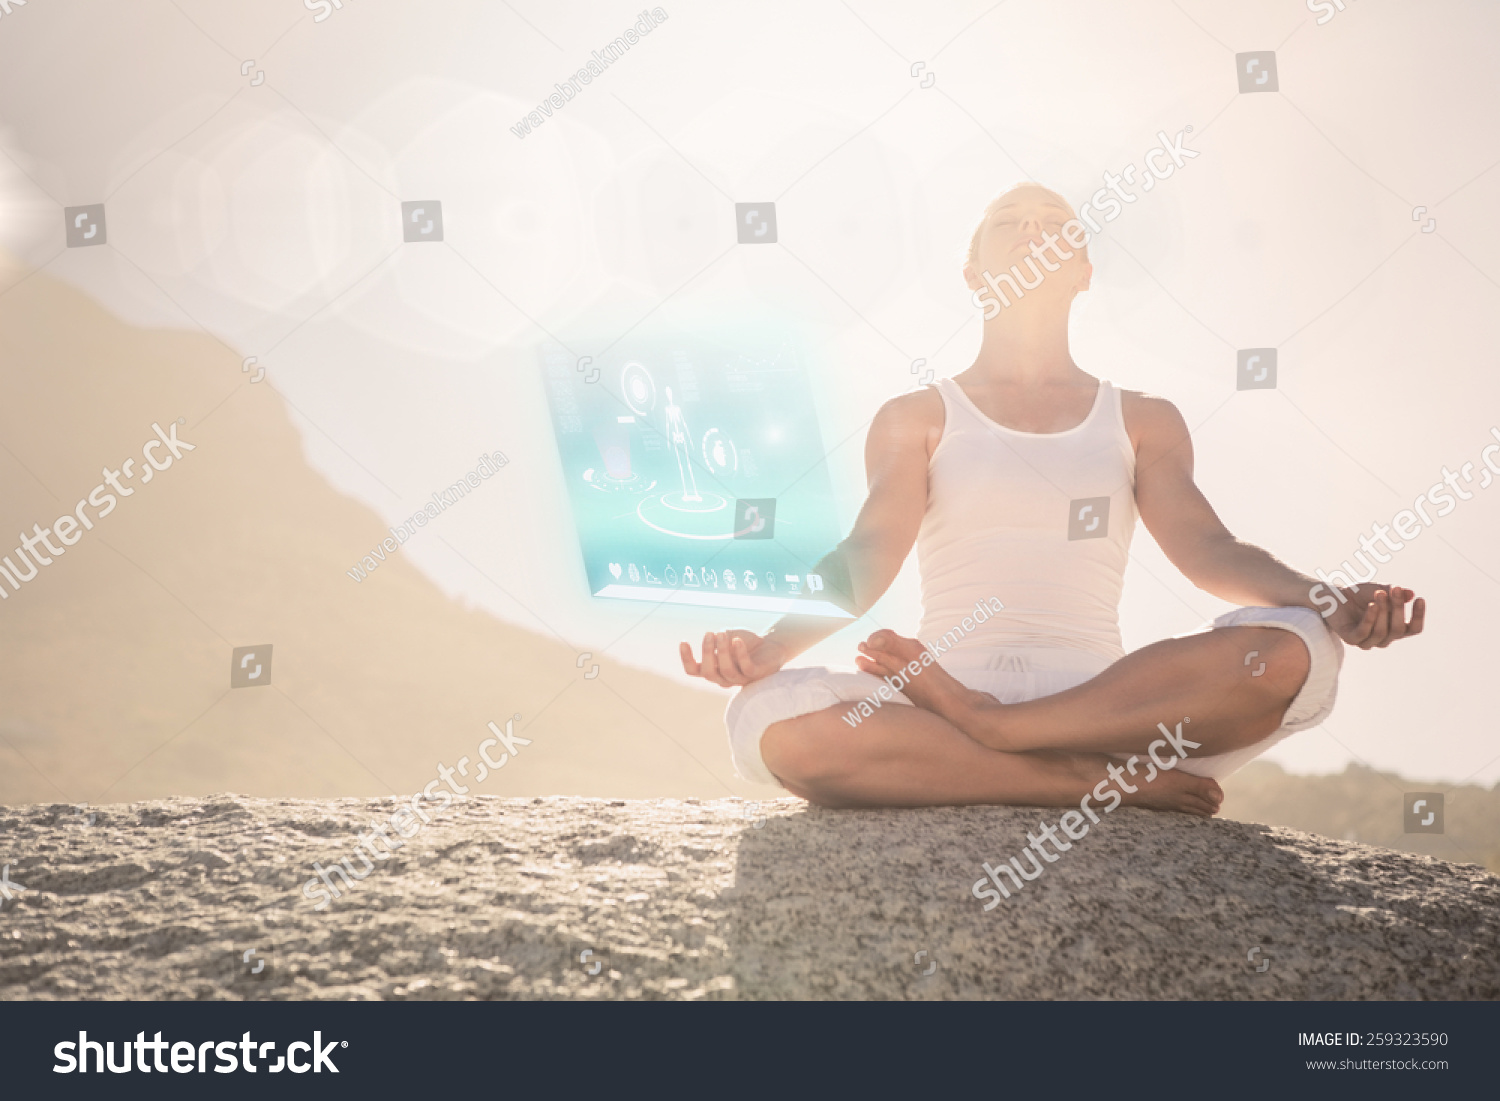 Blonde woman sitting in lotus pose on beach against fitness interface #259323590